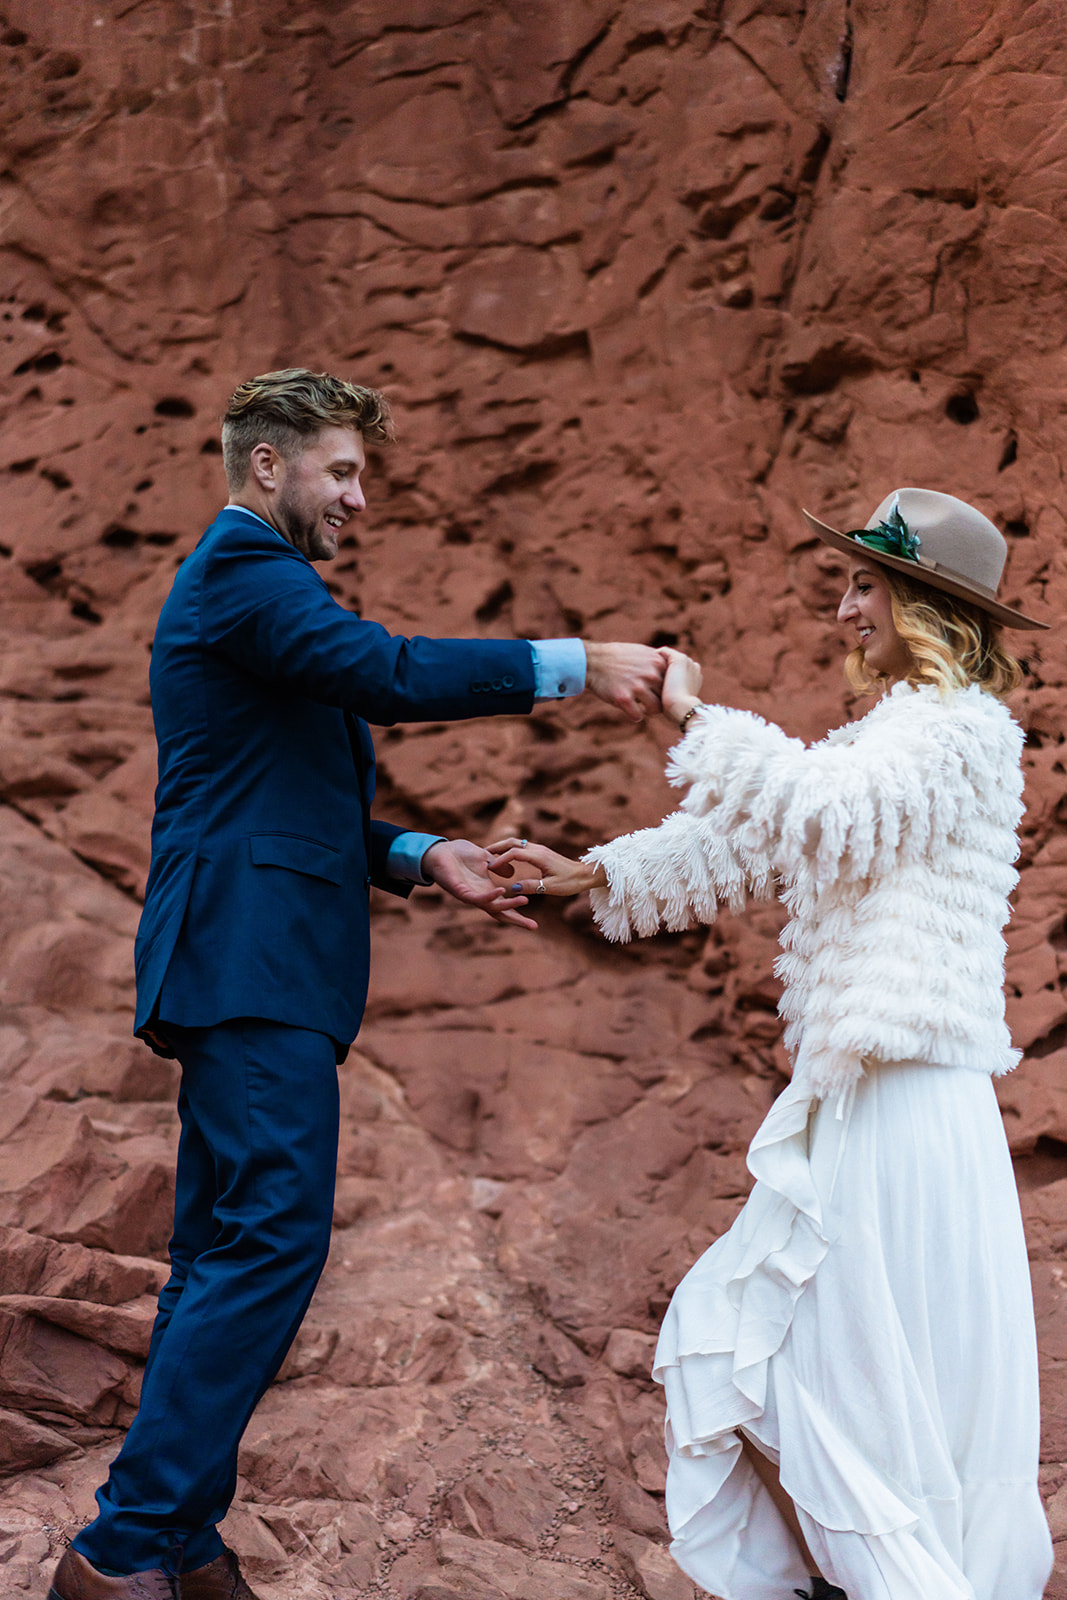 Newly engaged couple dancing in front of bright red rocks